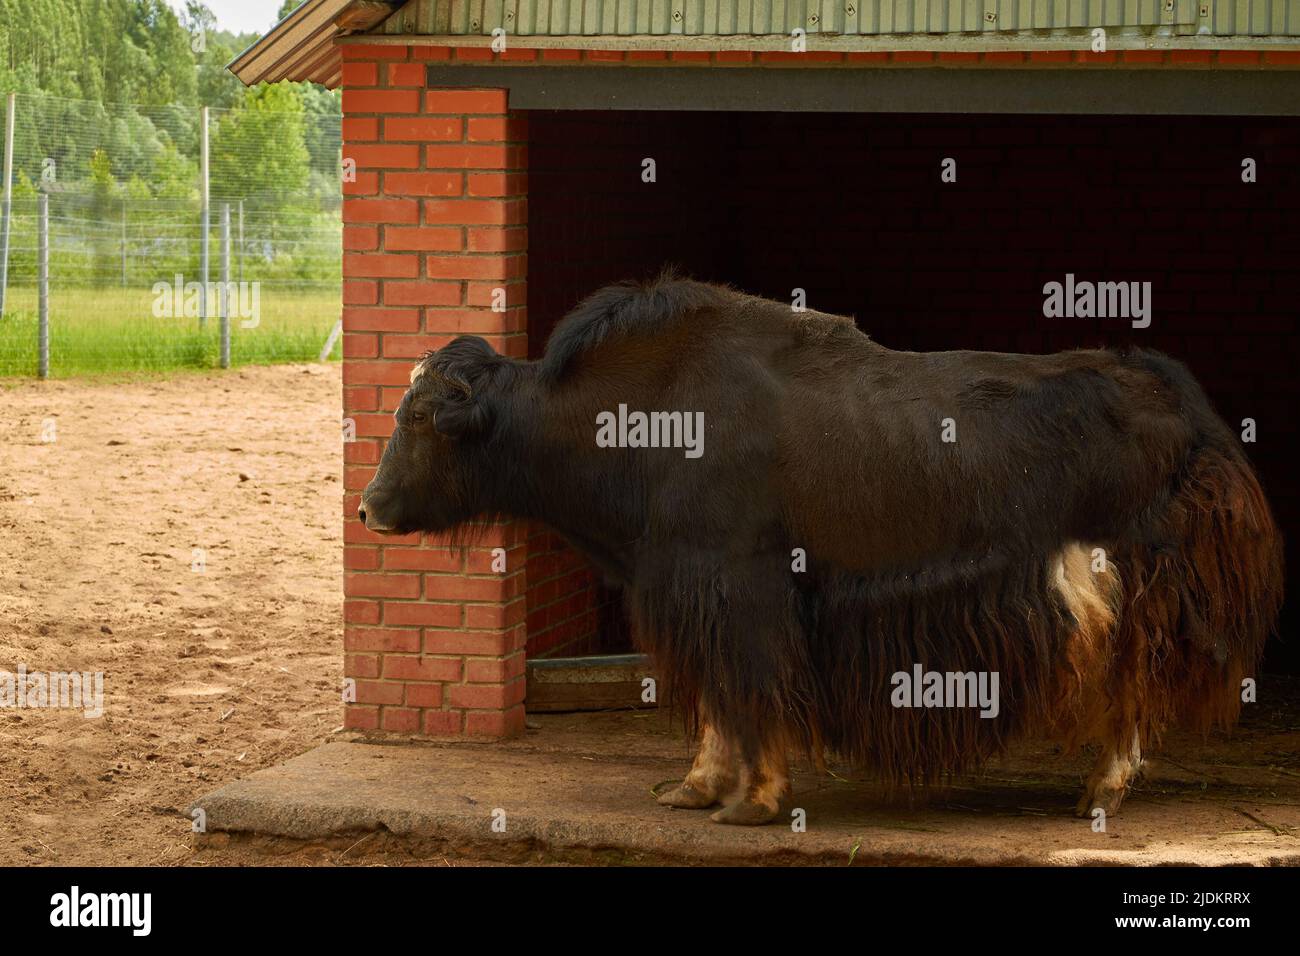 Bos grunniens. A female domestic yak stand in a corral Stock Photo